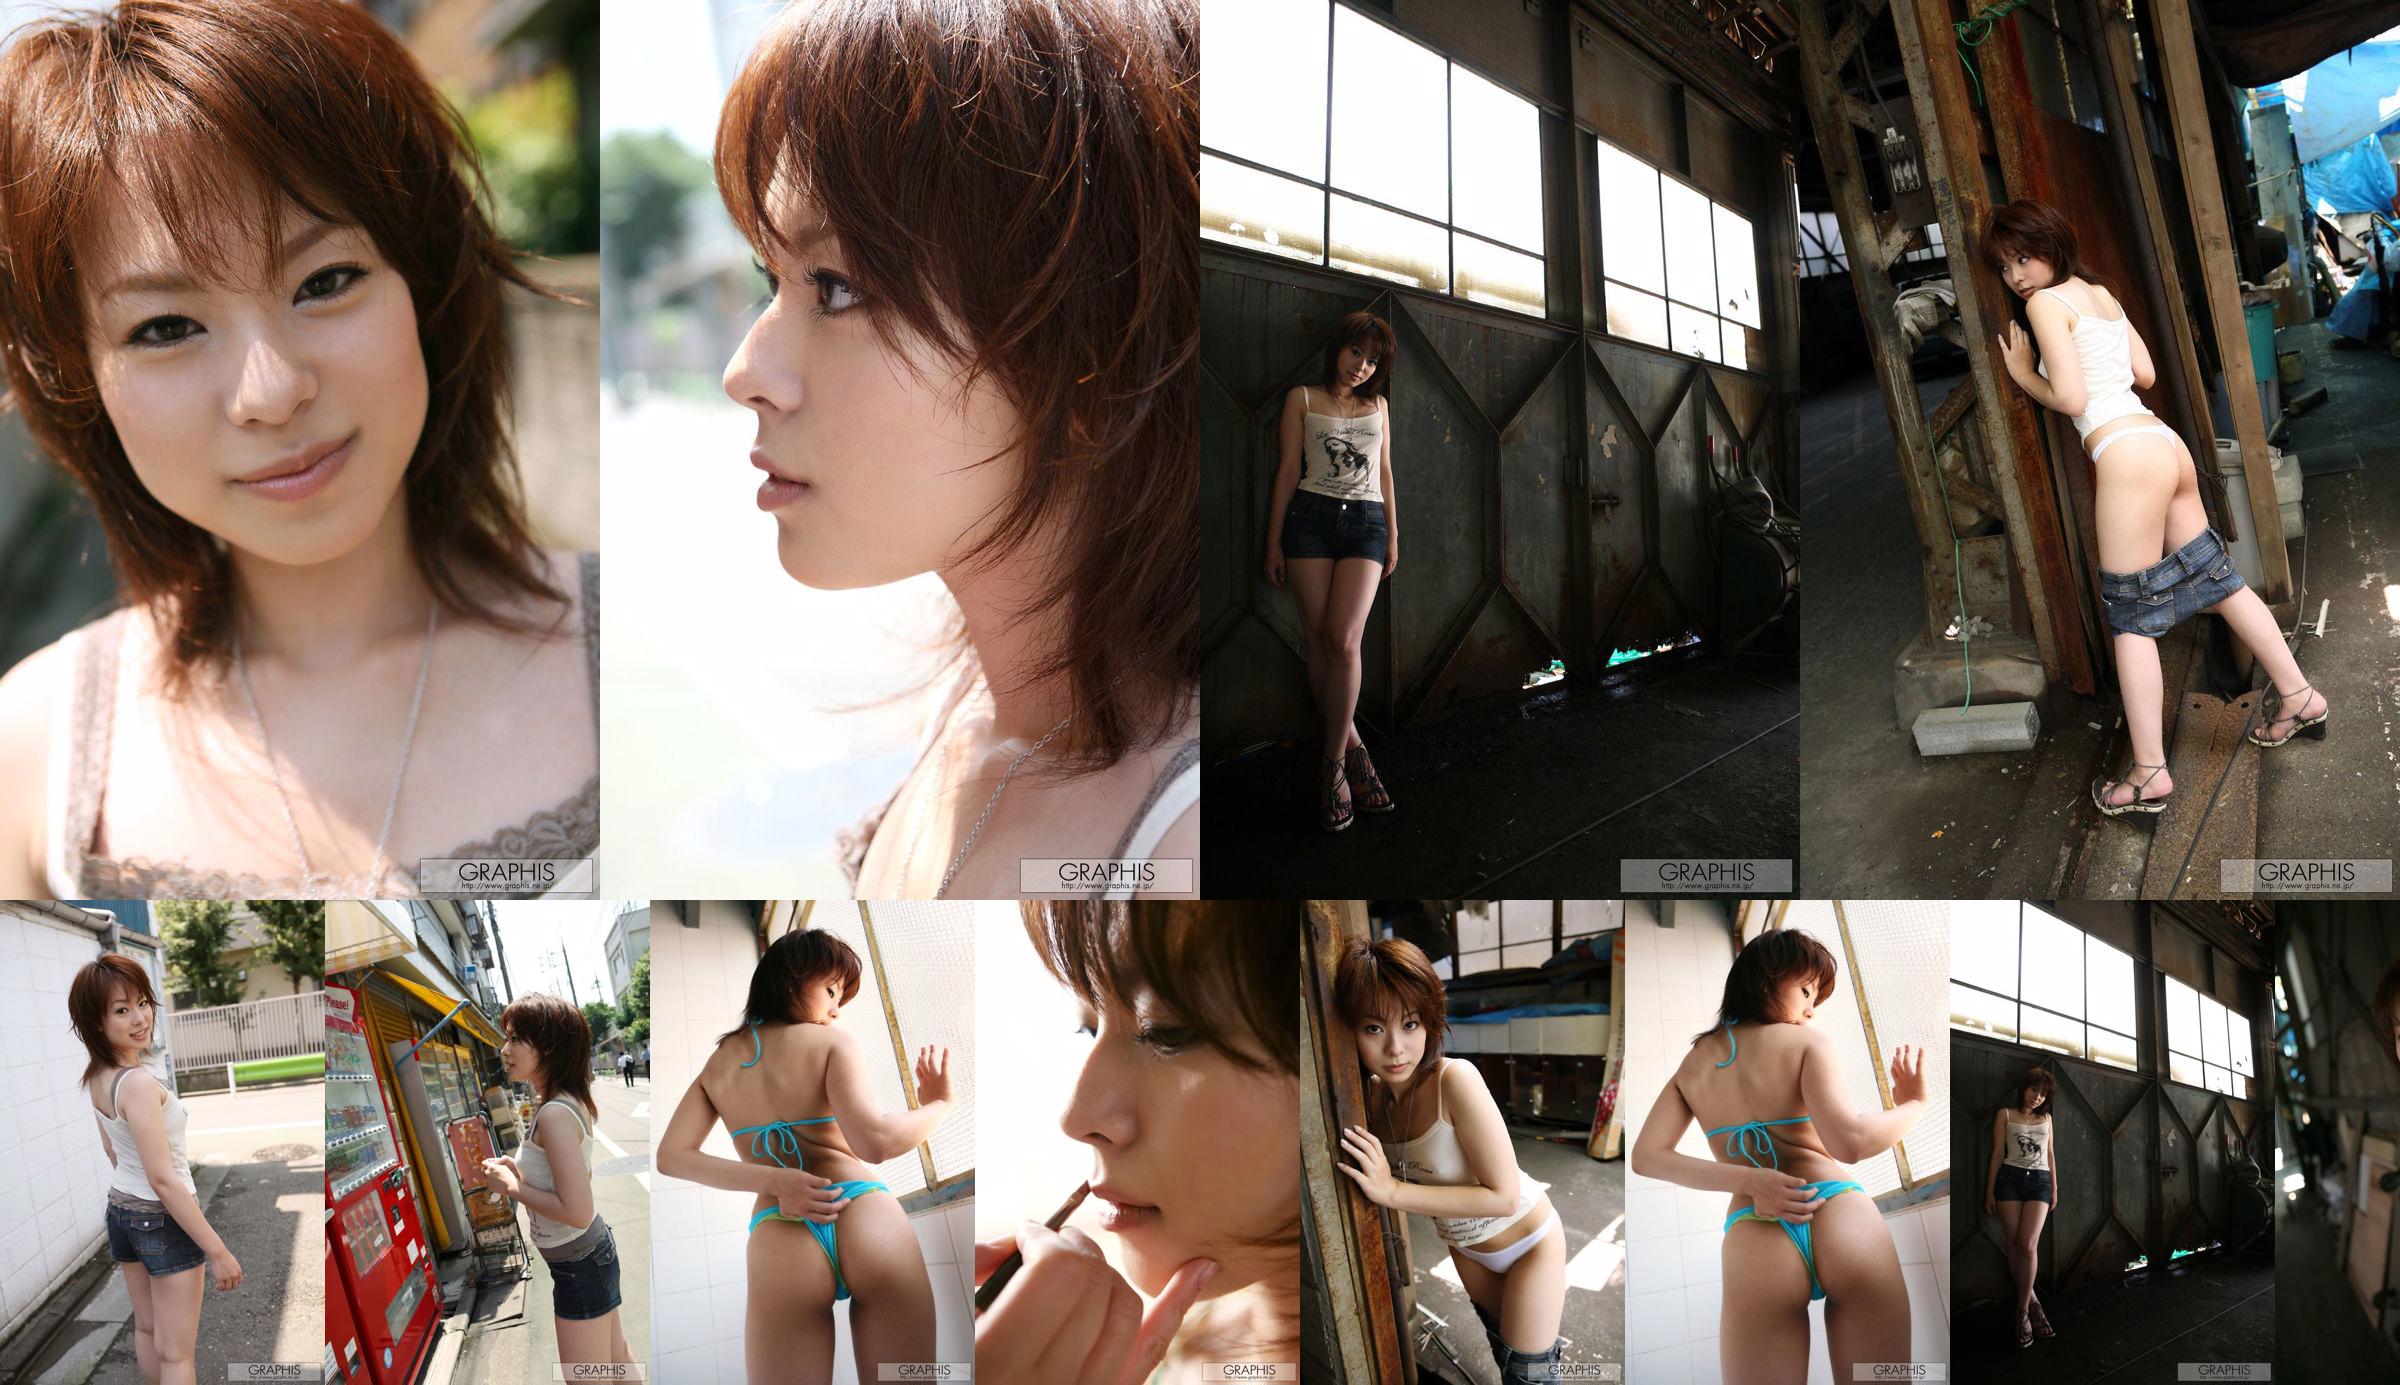 Mina Manabe Mina Manabe [Graphis] First Gravure First Take Off Daughter No.0ba07f Pagina 1